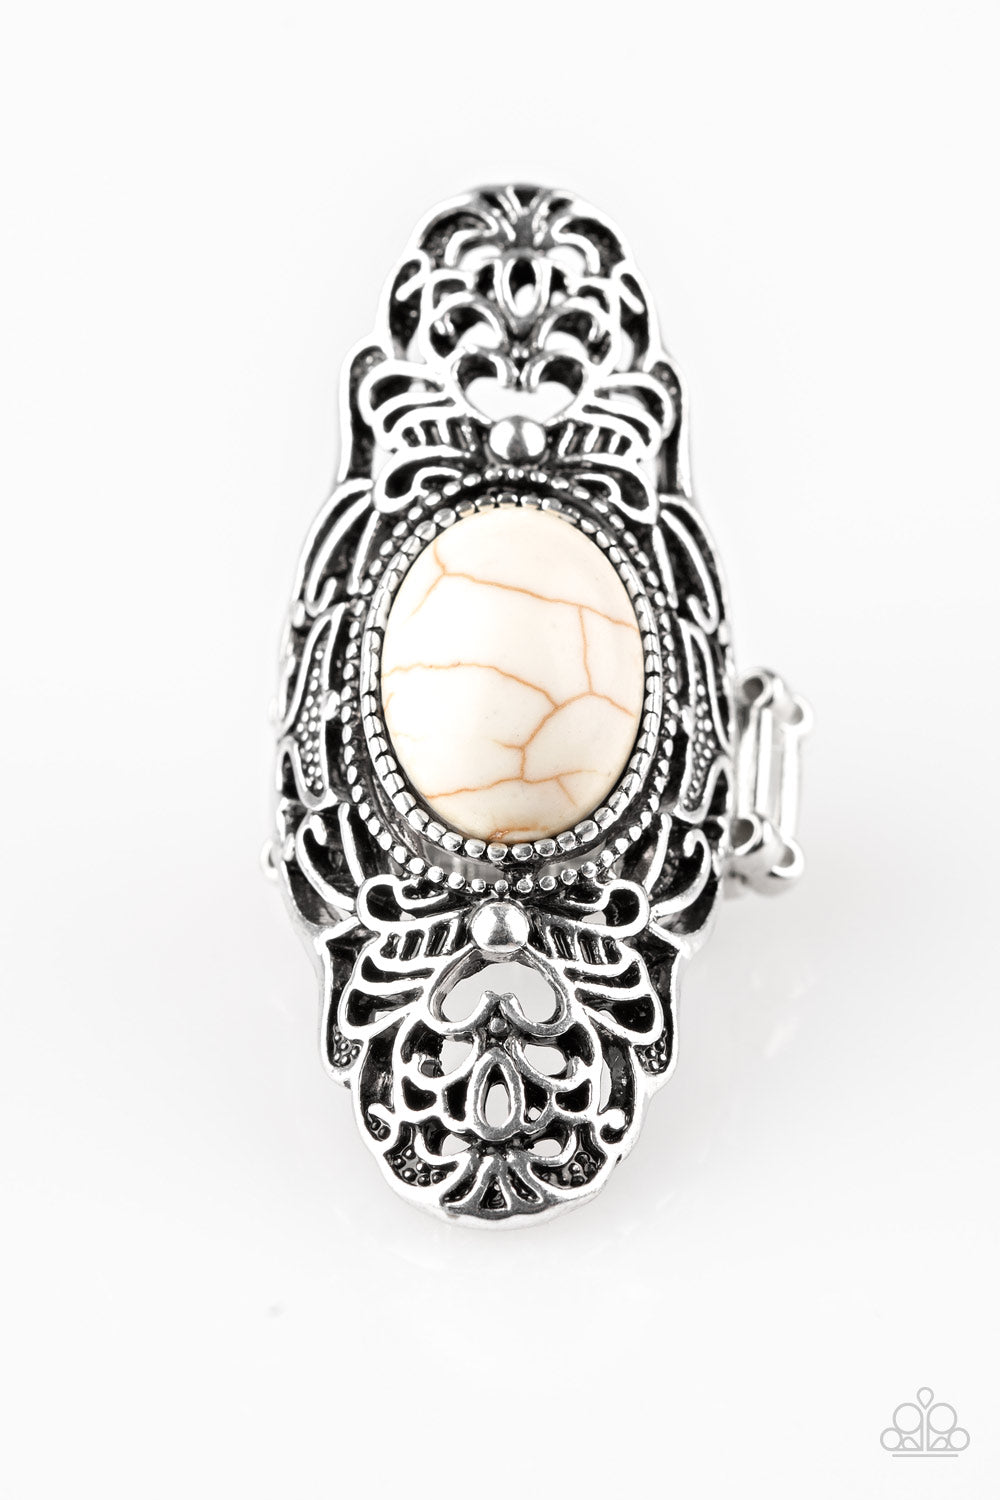 PRE-ORDER - Paparazzi Ego Trippin - White - Ring - $5 Jewelry with Ashley Swint